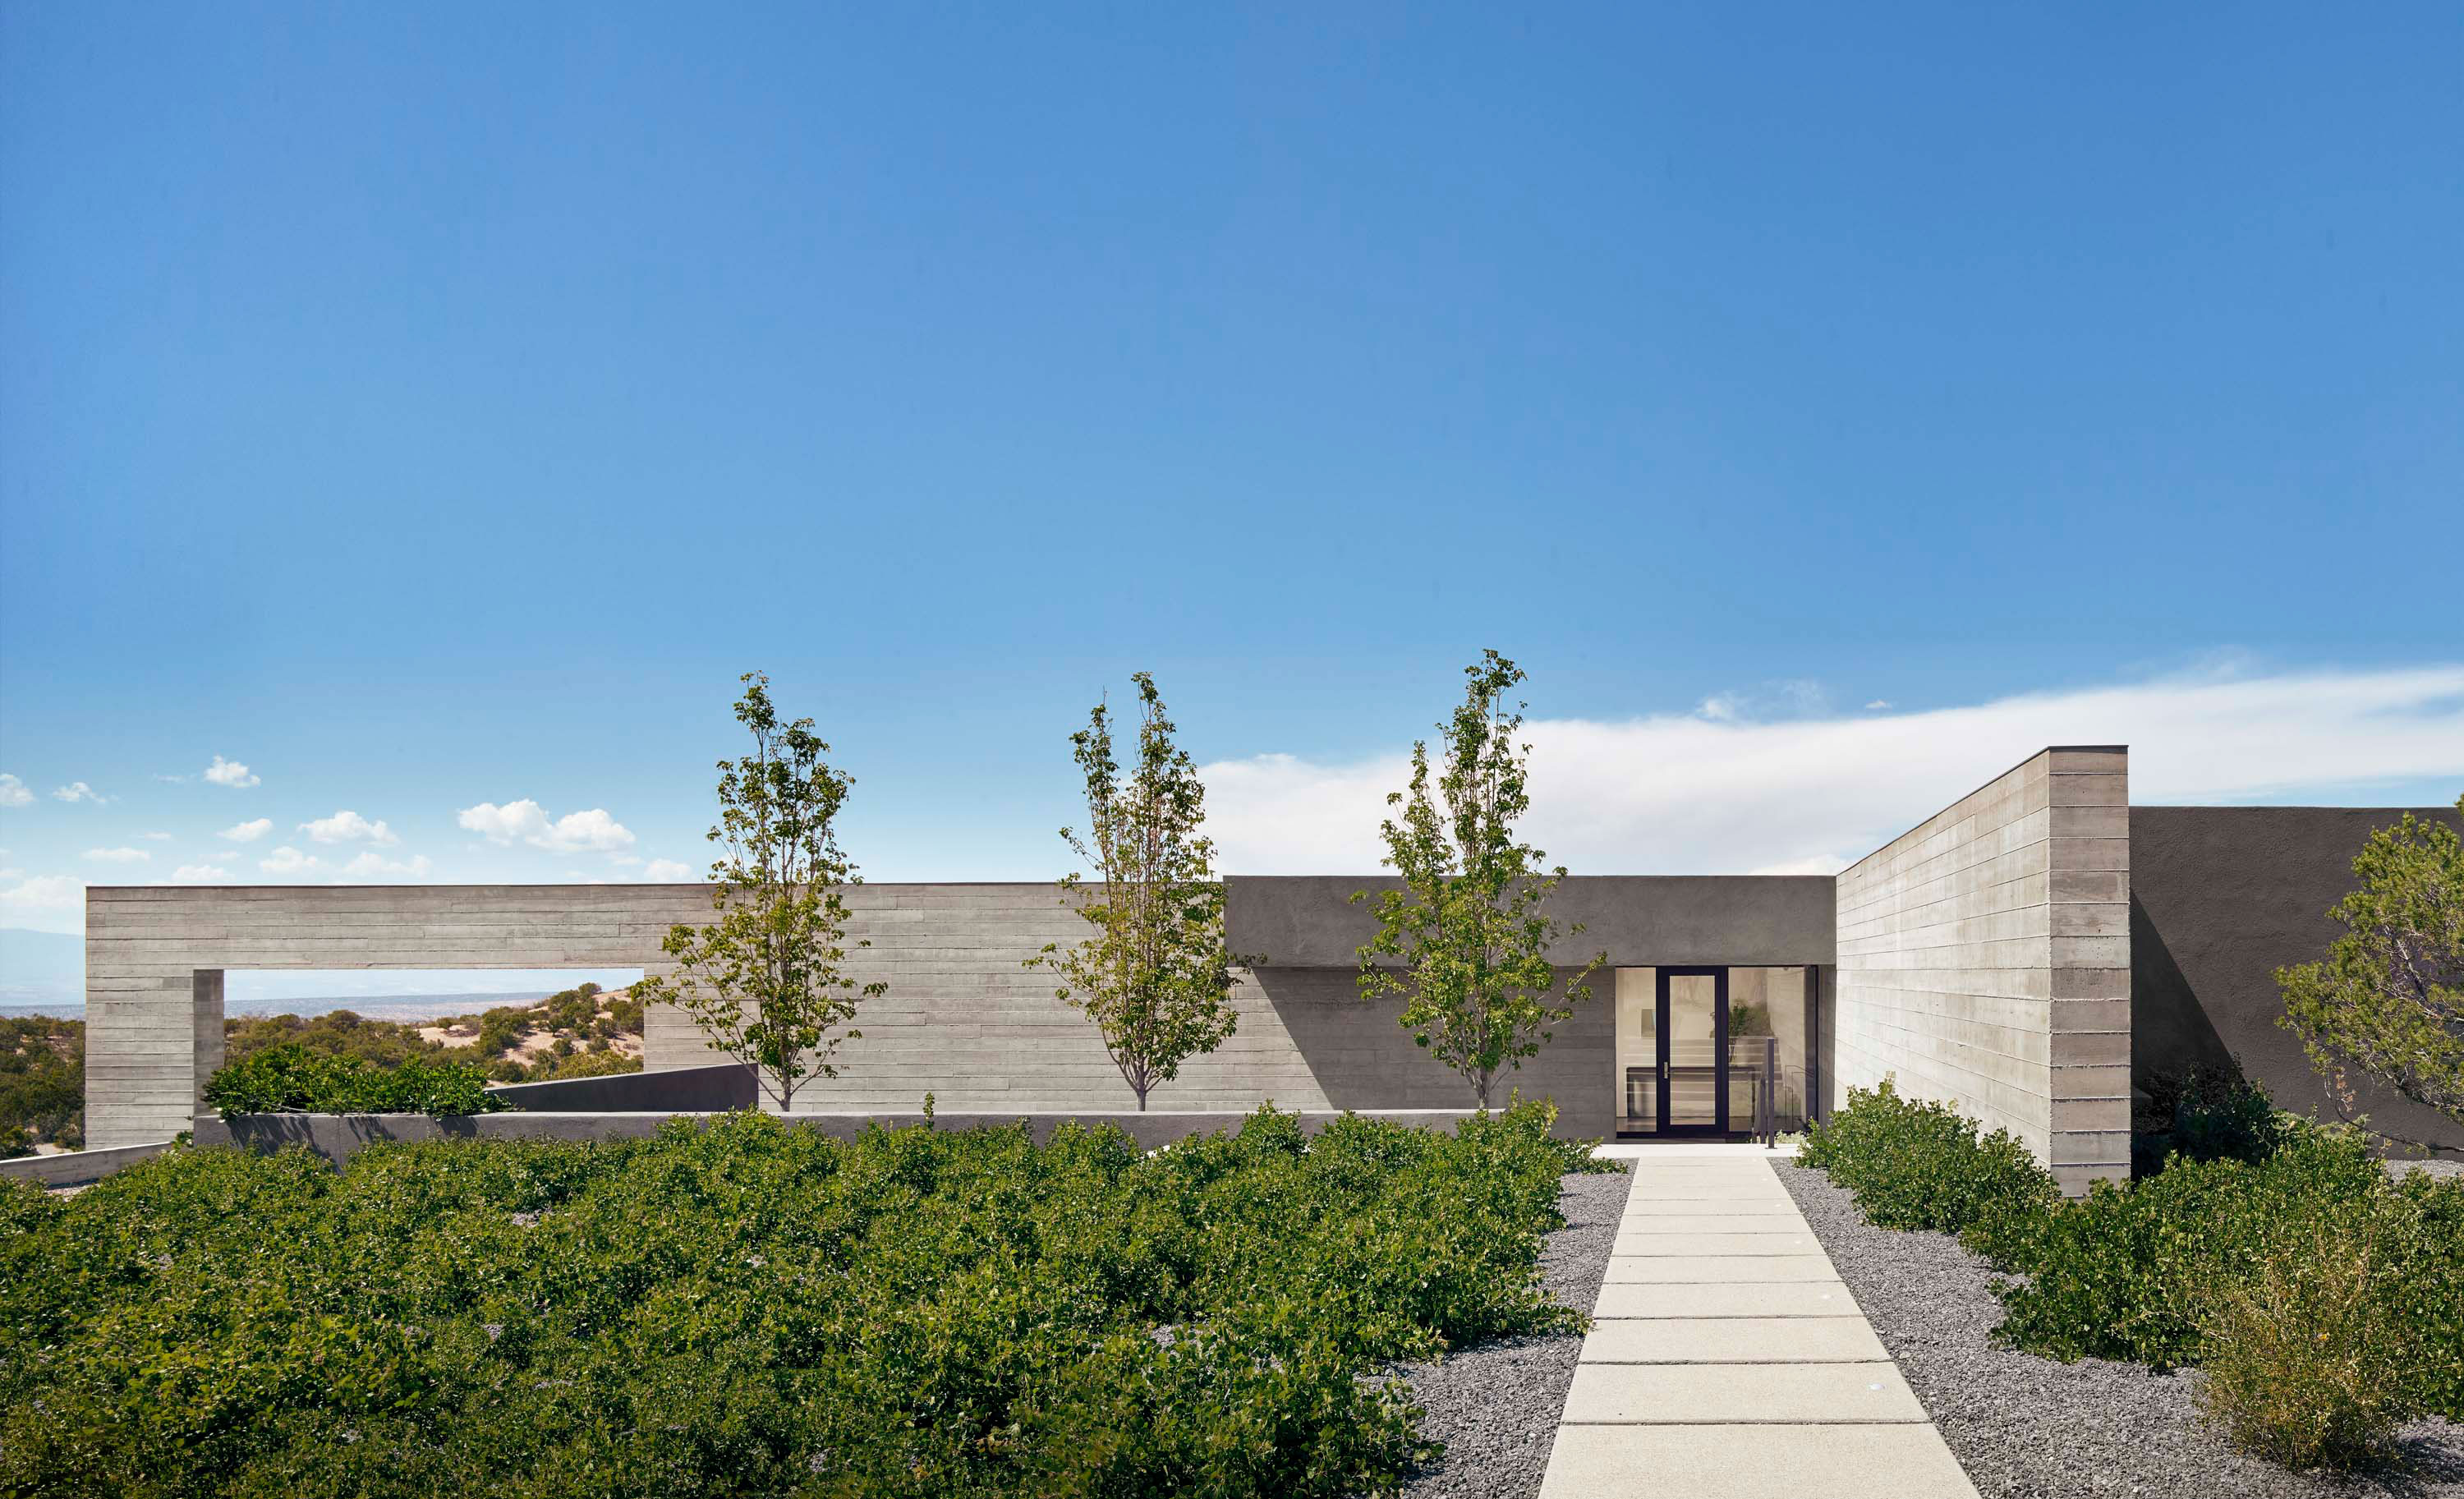 Exterior photo of the Sangre de Cristo House by Specht Novak Architects. Shot by Casey Dunn, featuring welcoming entryway surrounded by greenery and monolithic concrete wall.